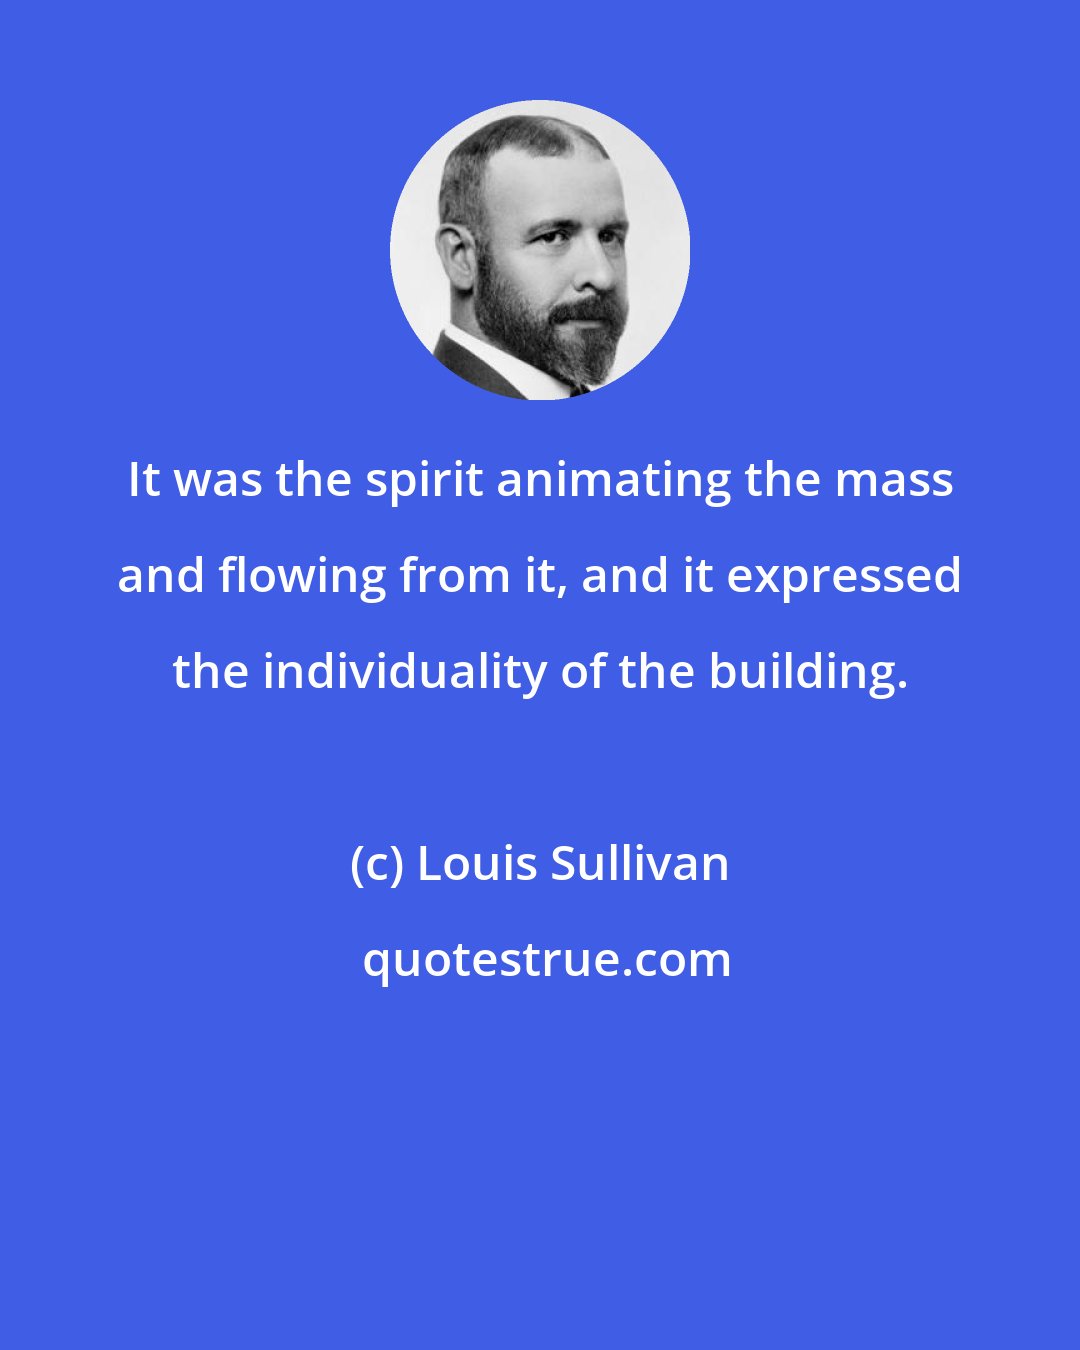 Louis Sullivan: It was the spirit animating the mass and flowing from it, and it expressed the individuality of the building.